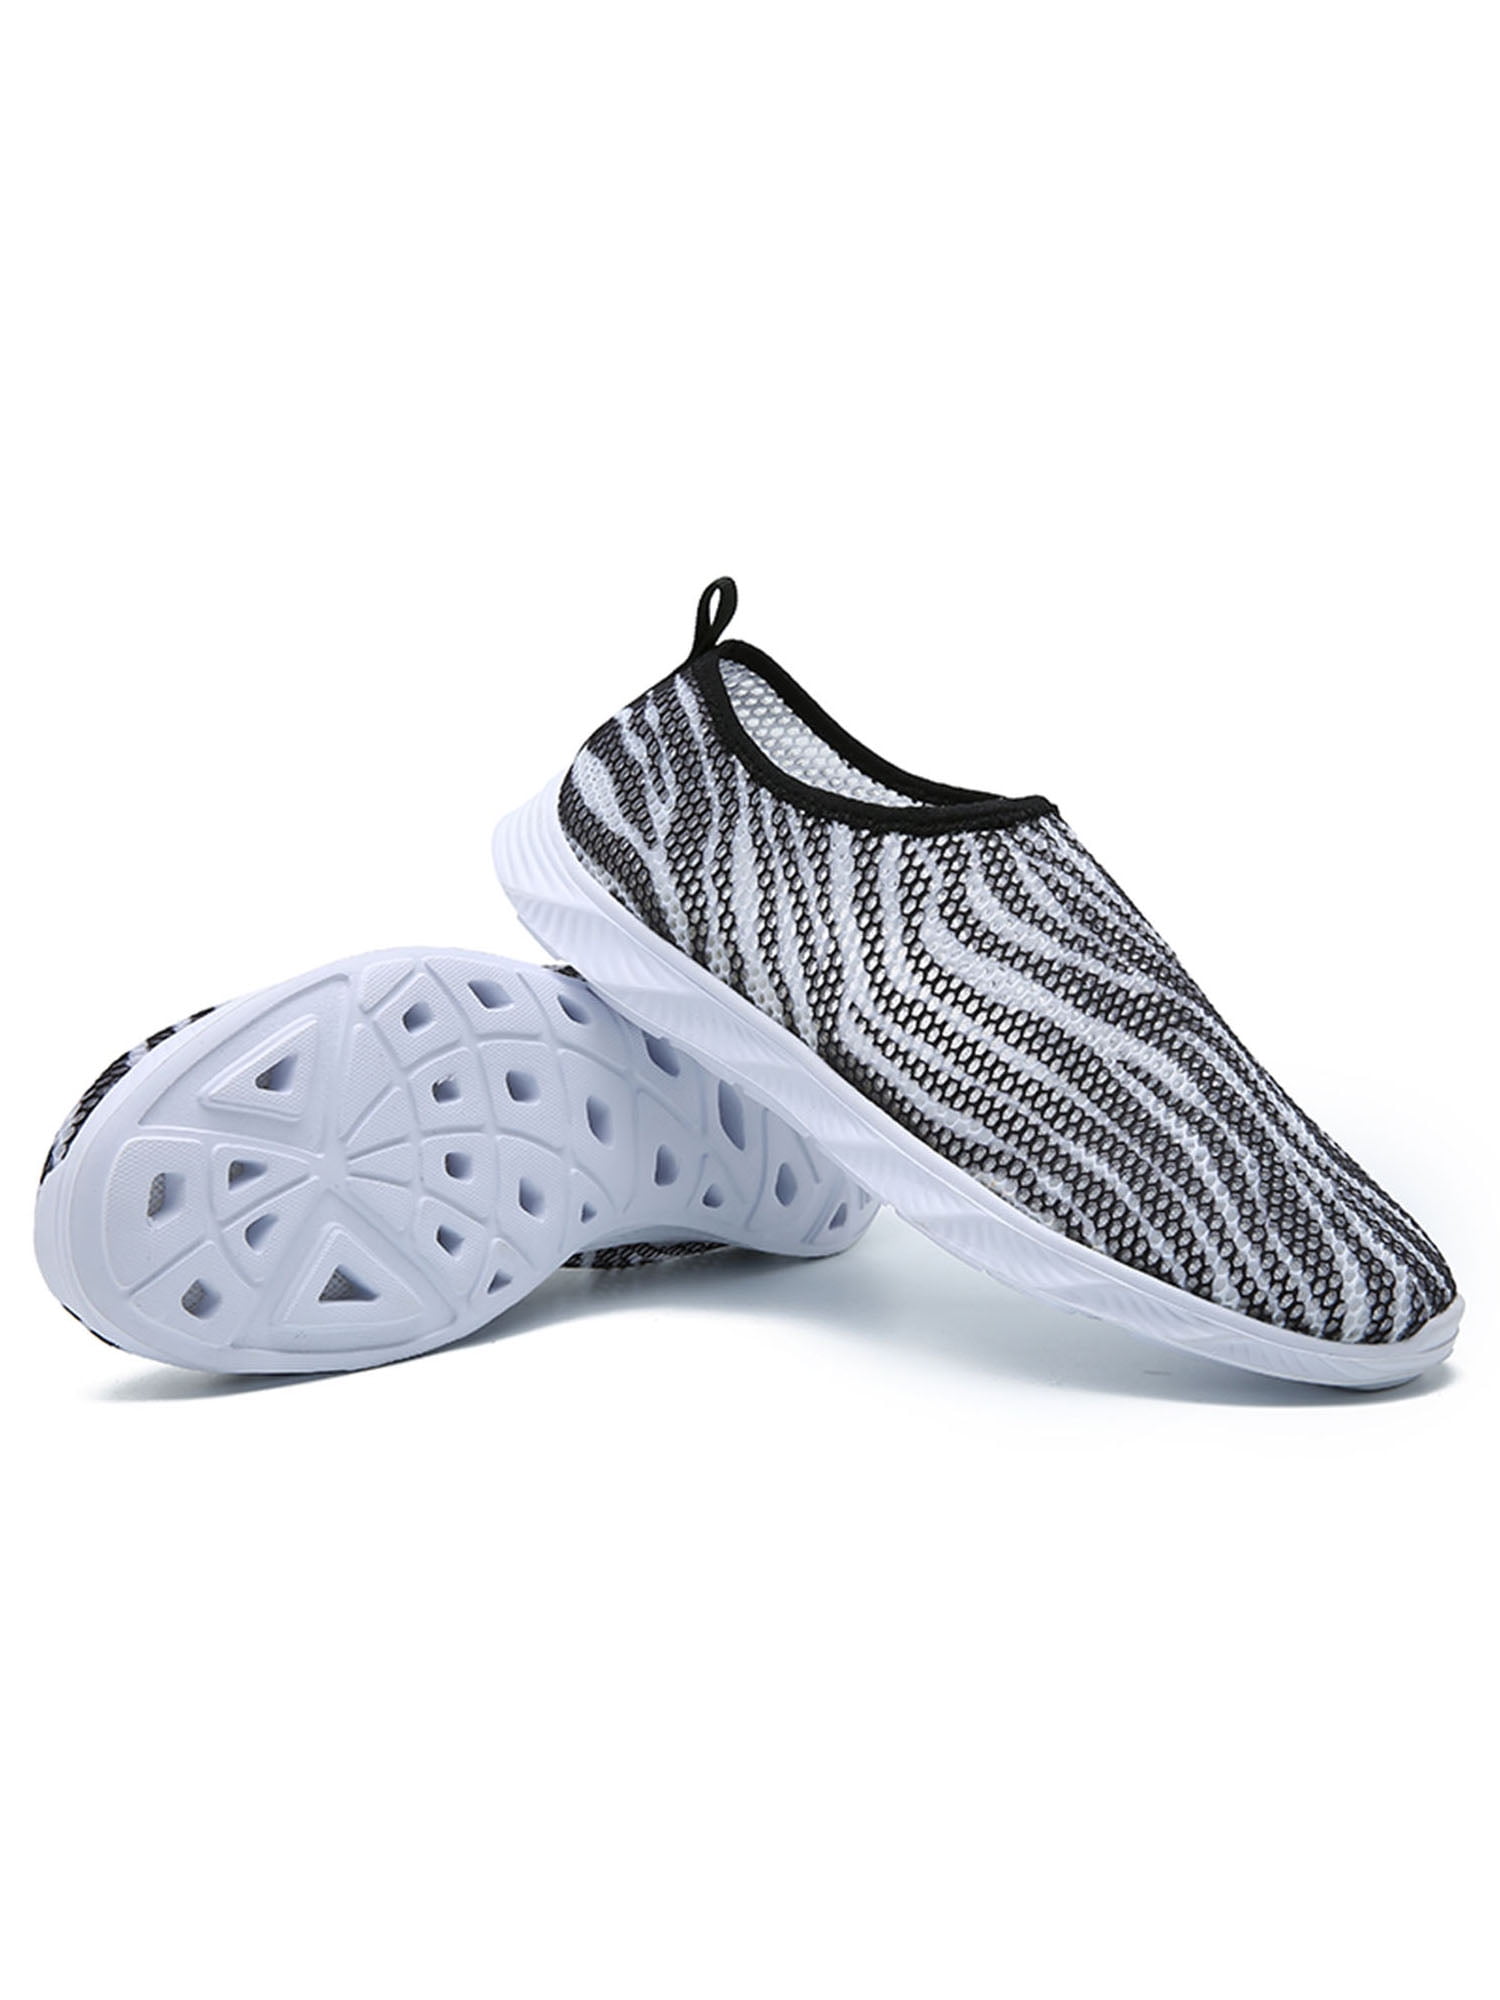 Quick Drying Mens Water Shoes Anti-slip 